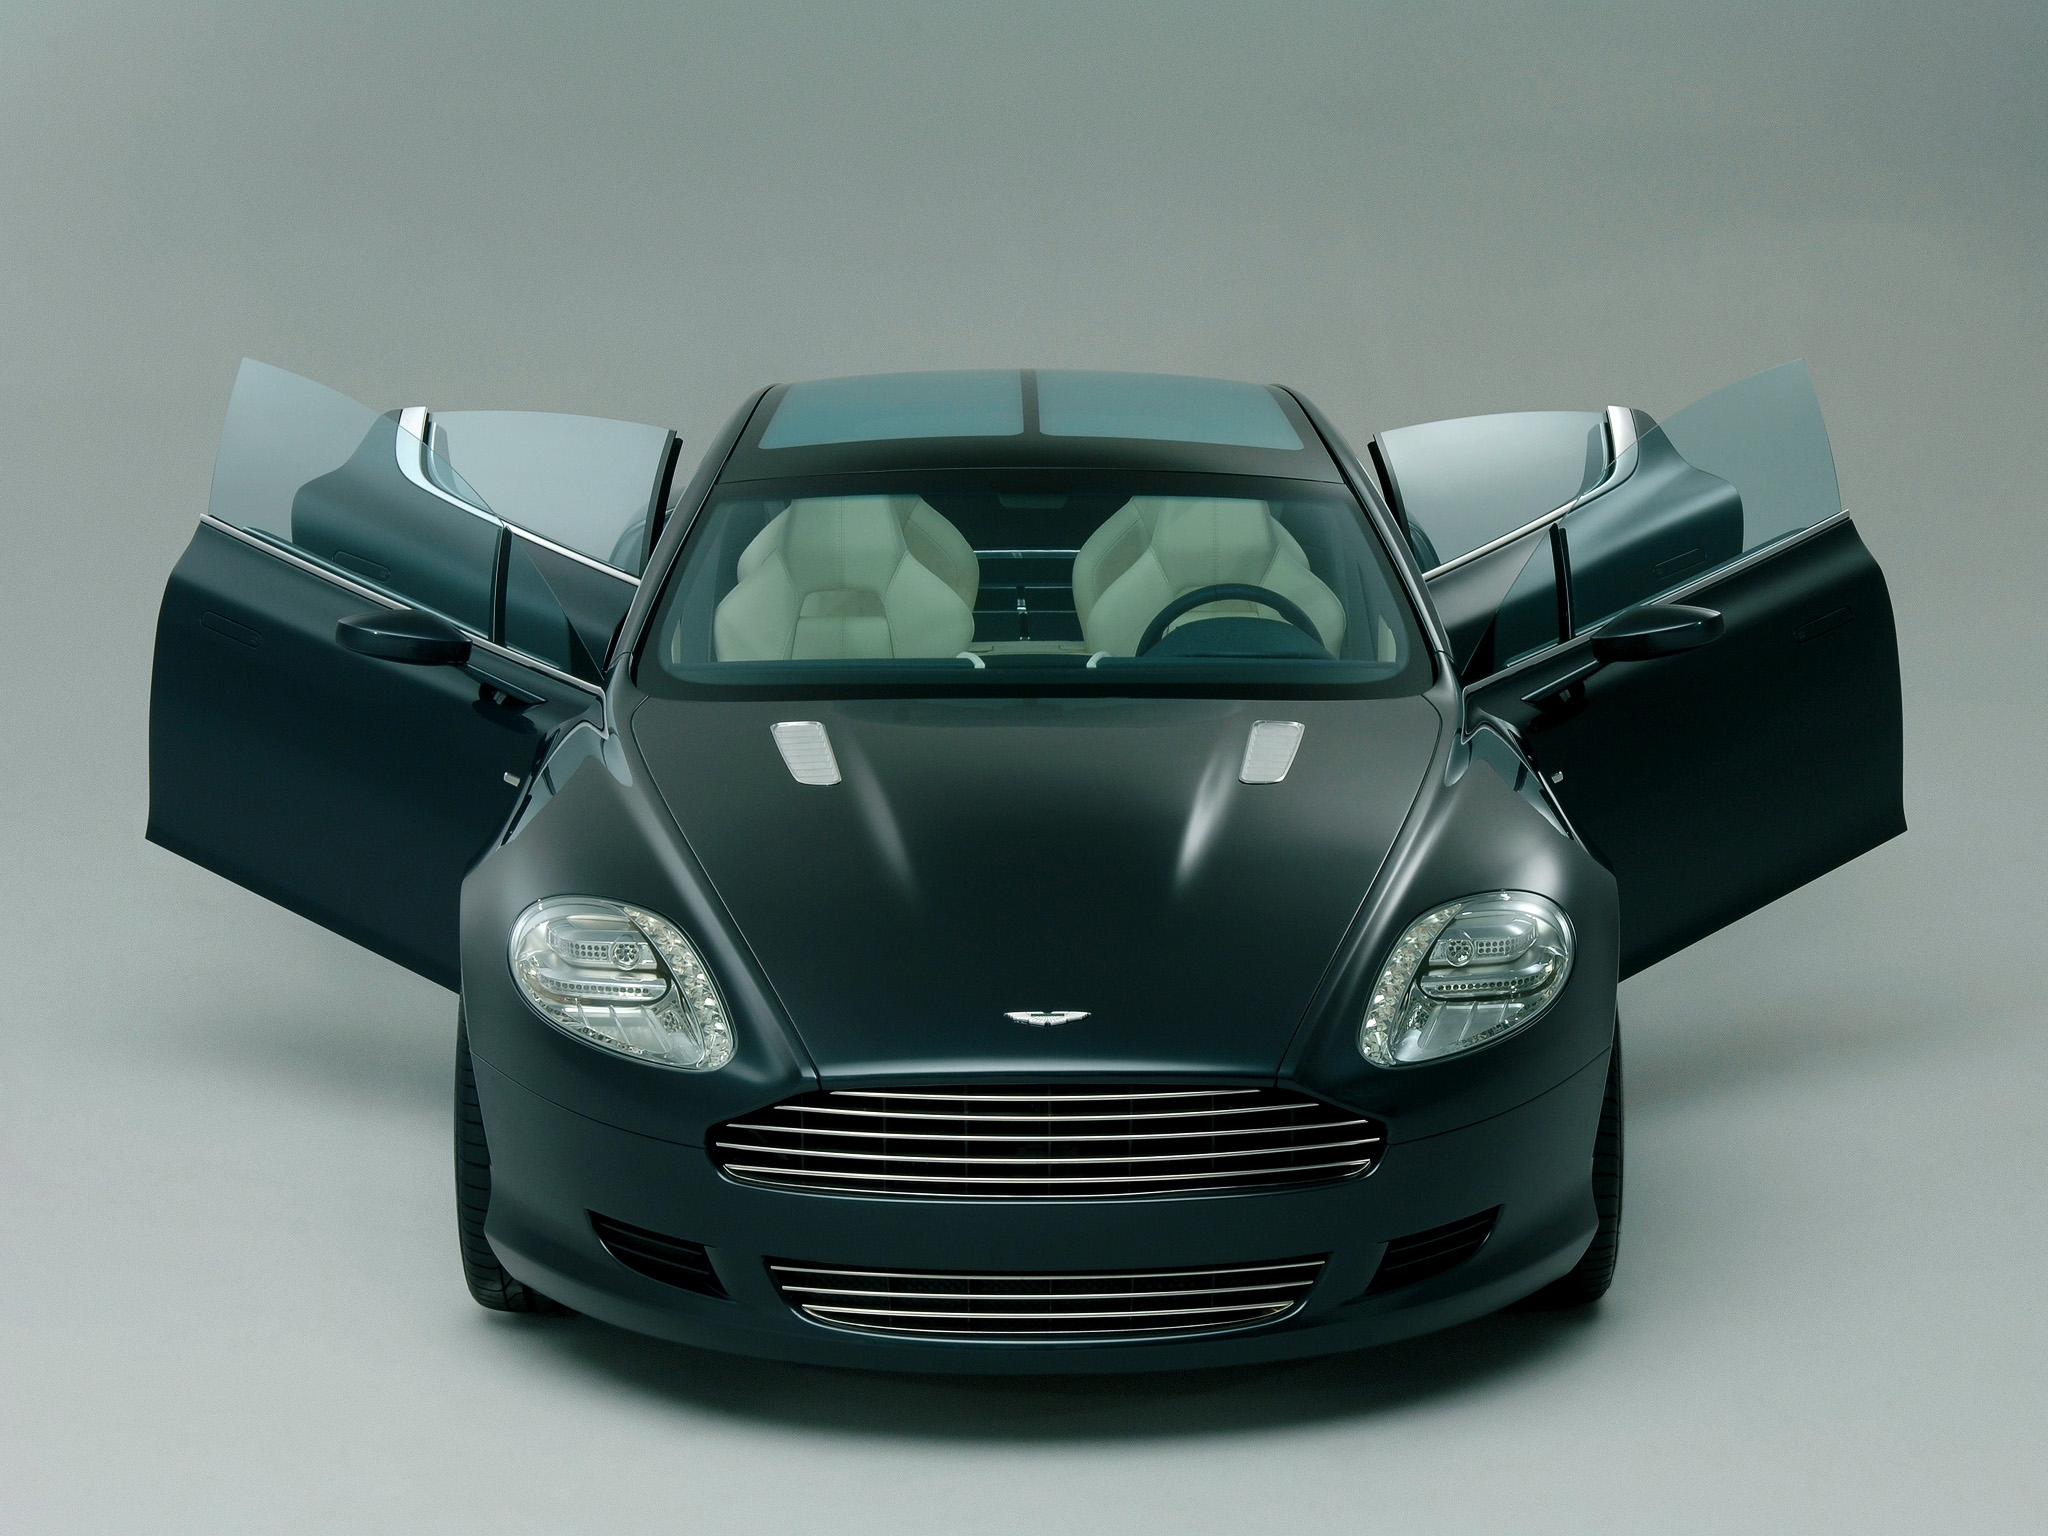 cars, sports, aston martin, black, front view, concept car, 2006, rapide Free Stock Photo